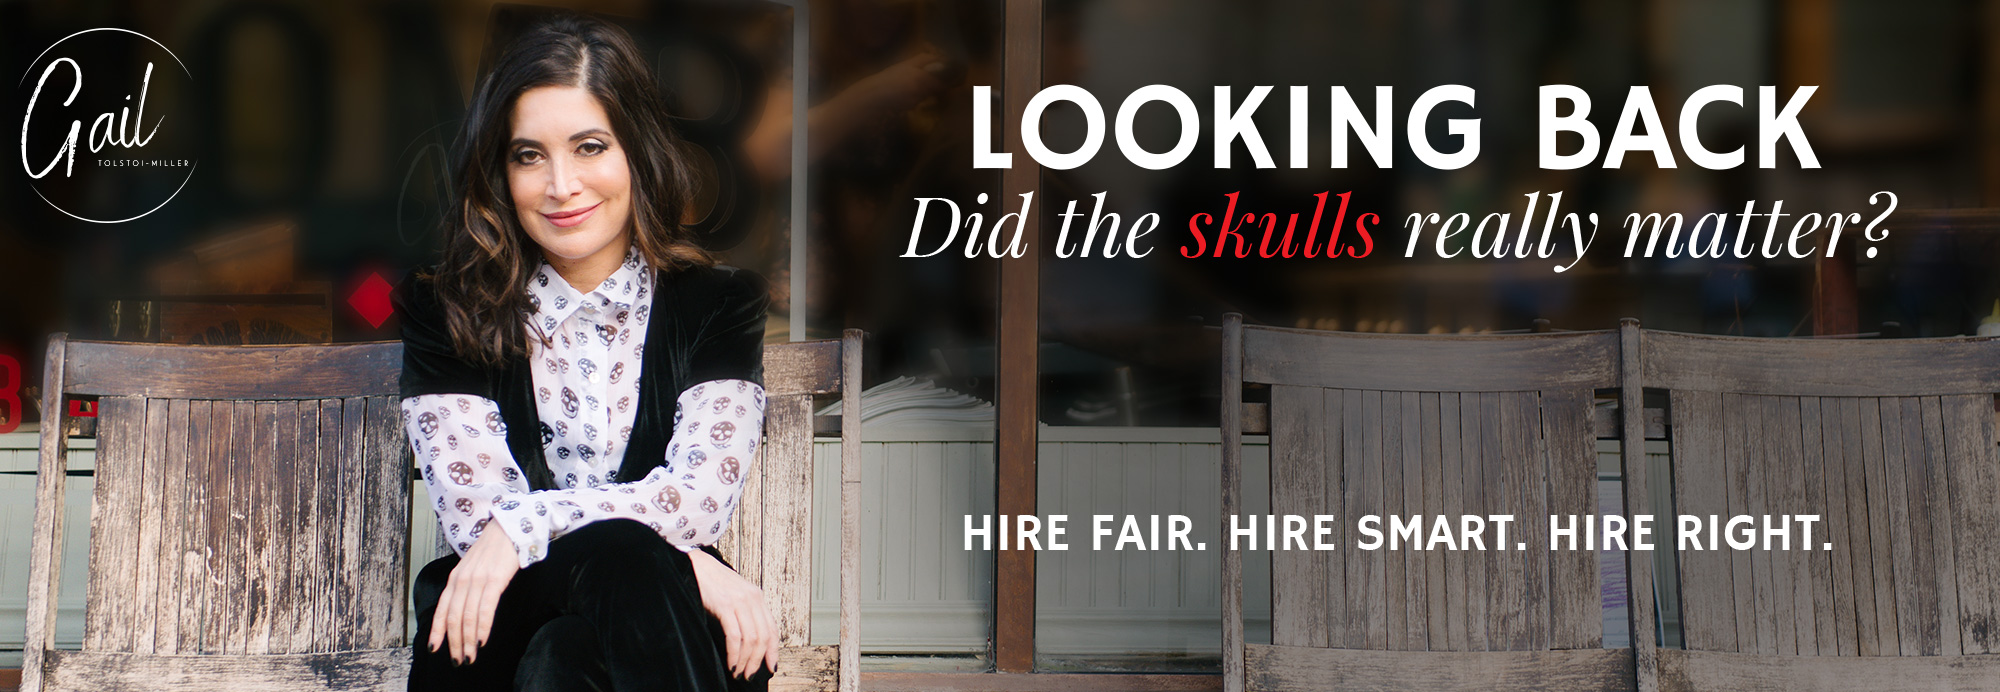 Looking Back, Did the skulls really matter? Hire Fair. Hire Smart. Hire Right.